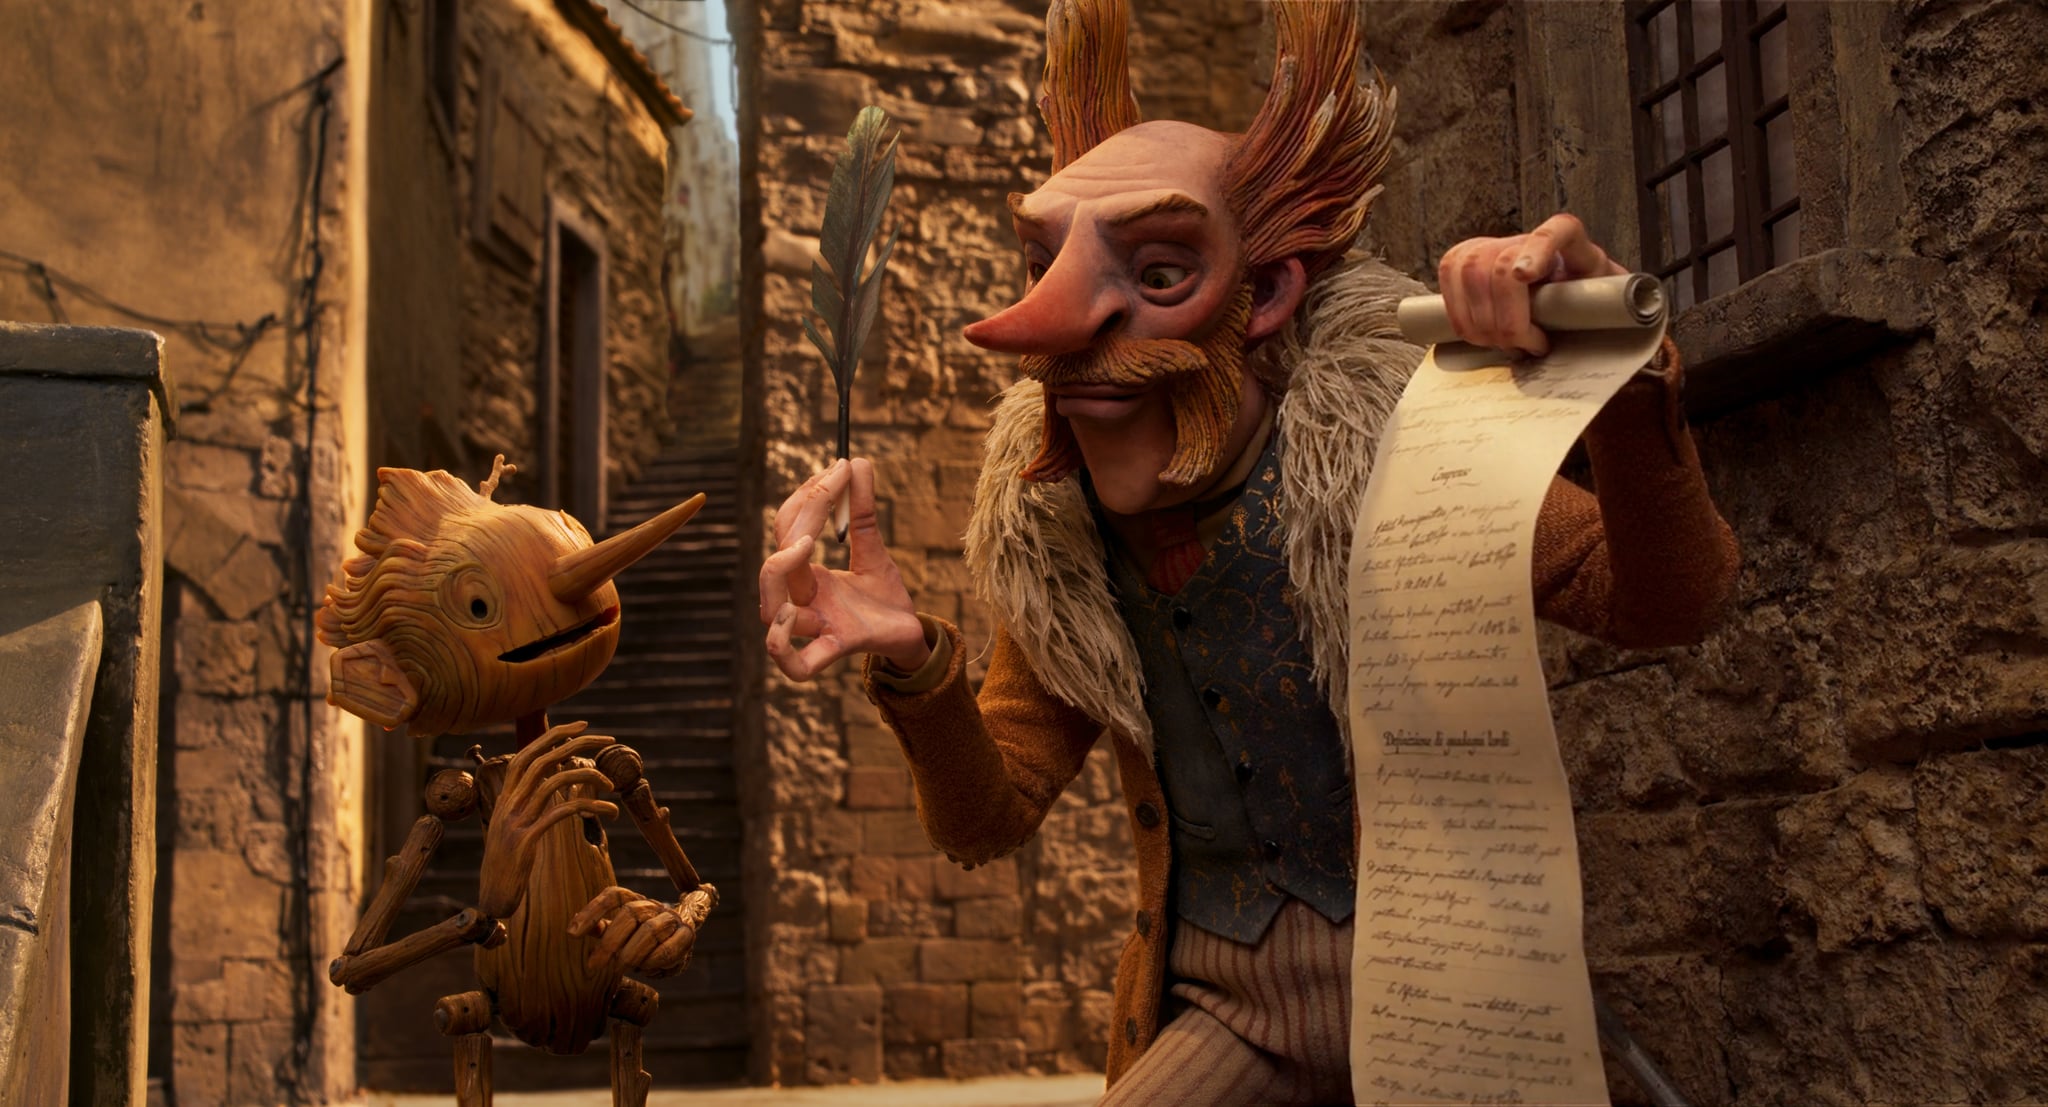 Guillermo del Toro’s Stop-Motion “Pinocchio” Is One of a Kind